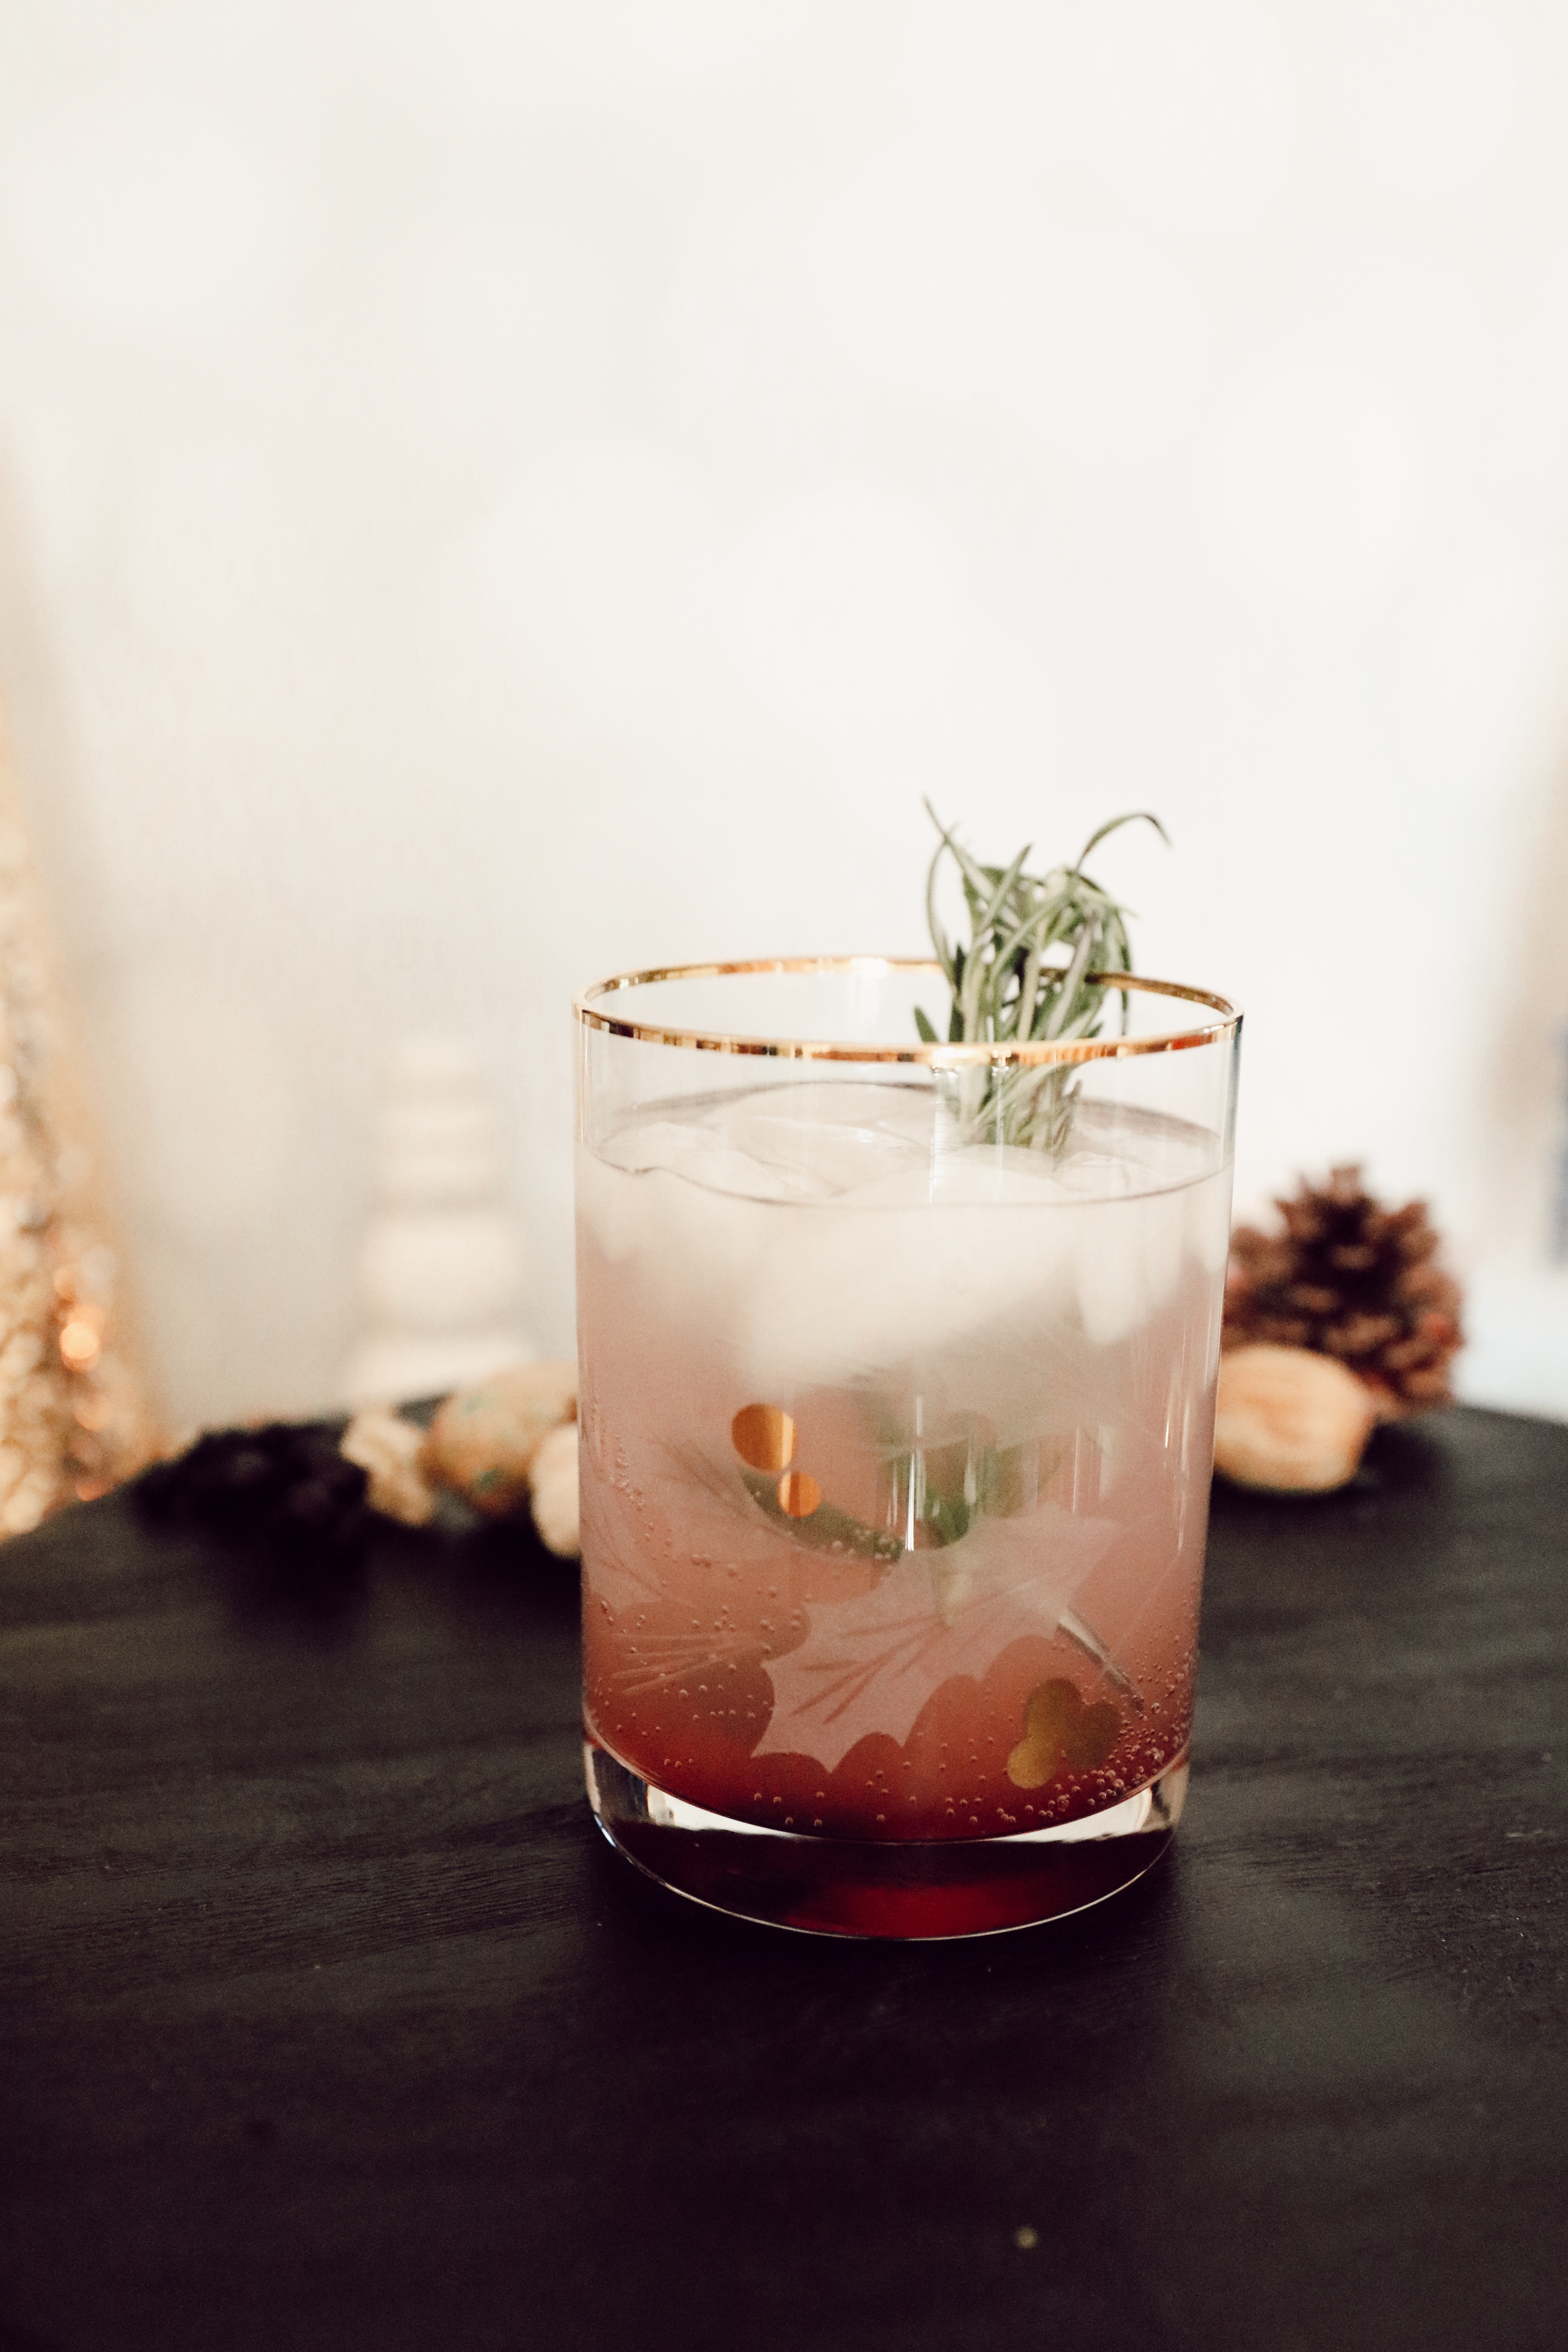 Top Nashville Lifestyle blogger, Nashville Wifestyles shares her Easy 3 Ingredient Holiday Cocktail, Rudolph's Ruby Nose Rhubarb Fizz!